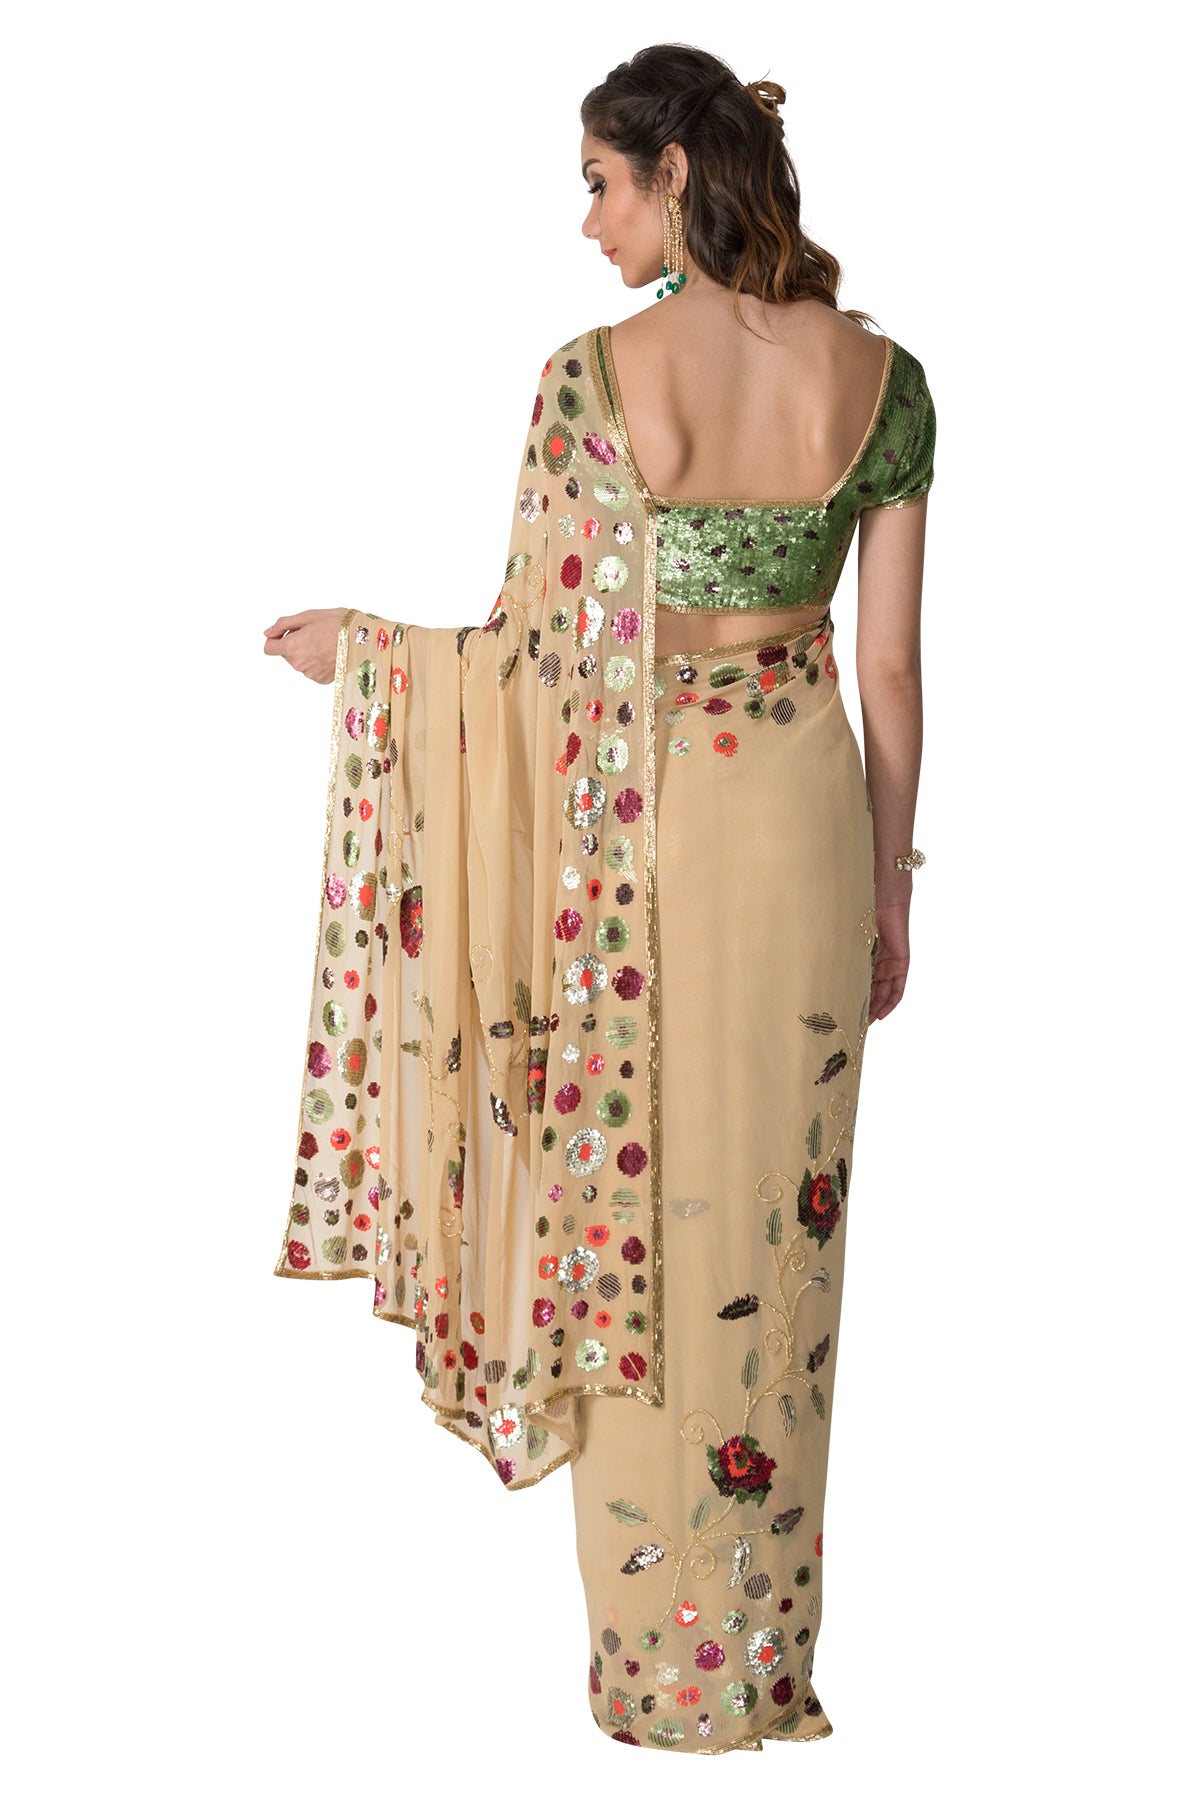 Cream and green sequins embroidered saree